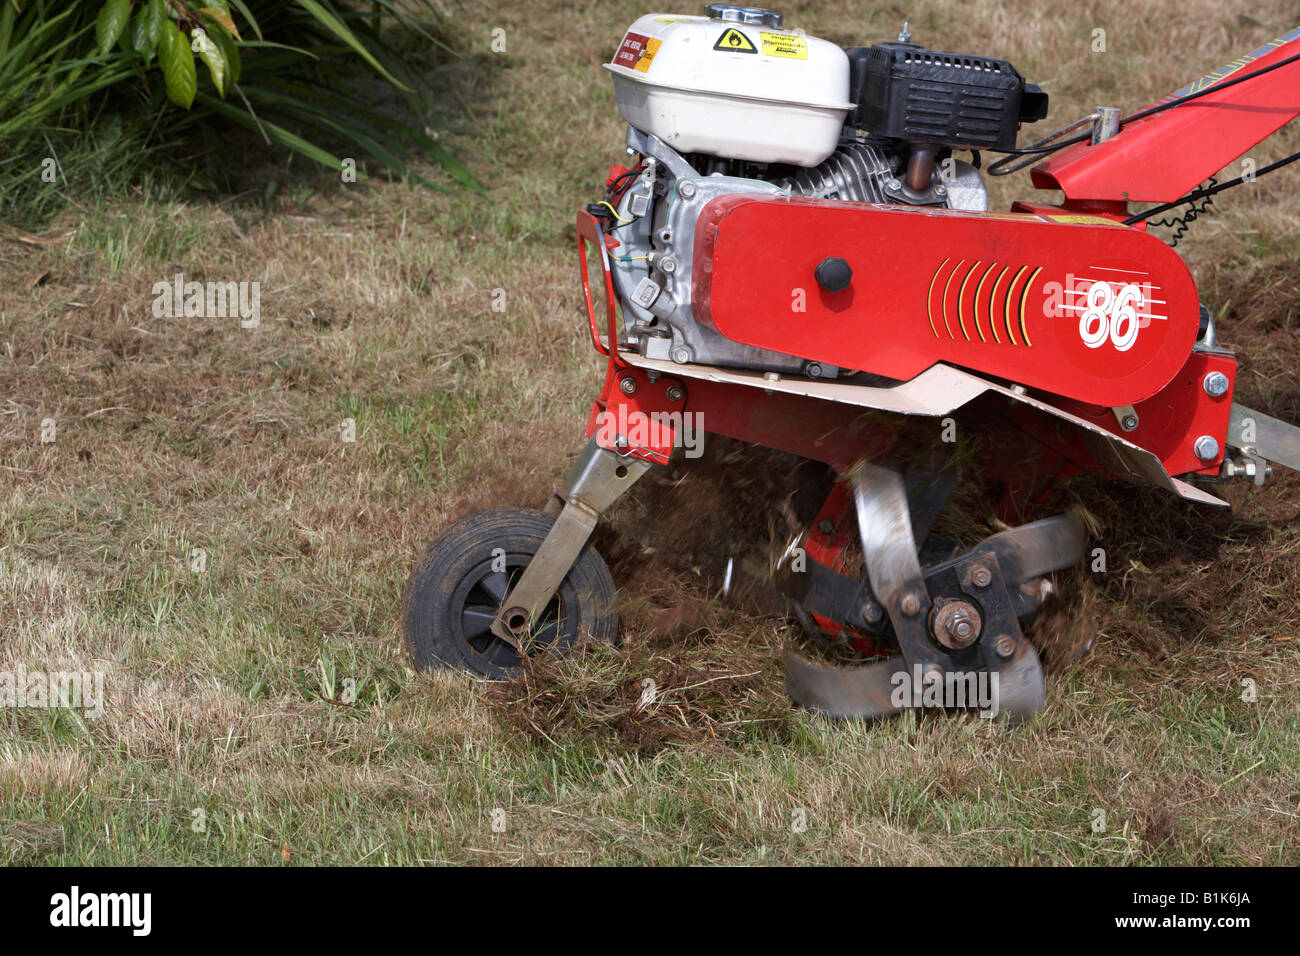 Petrol Driven Garden Rotavator Being Used To Churn Up Soil In A